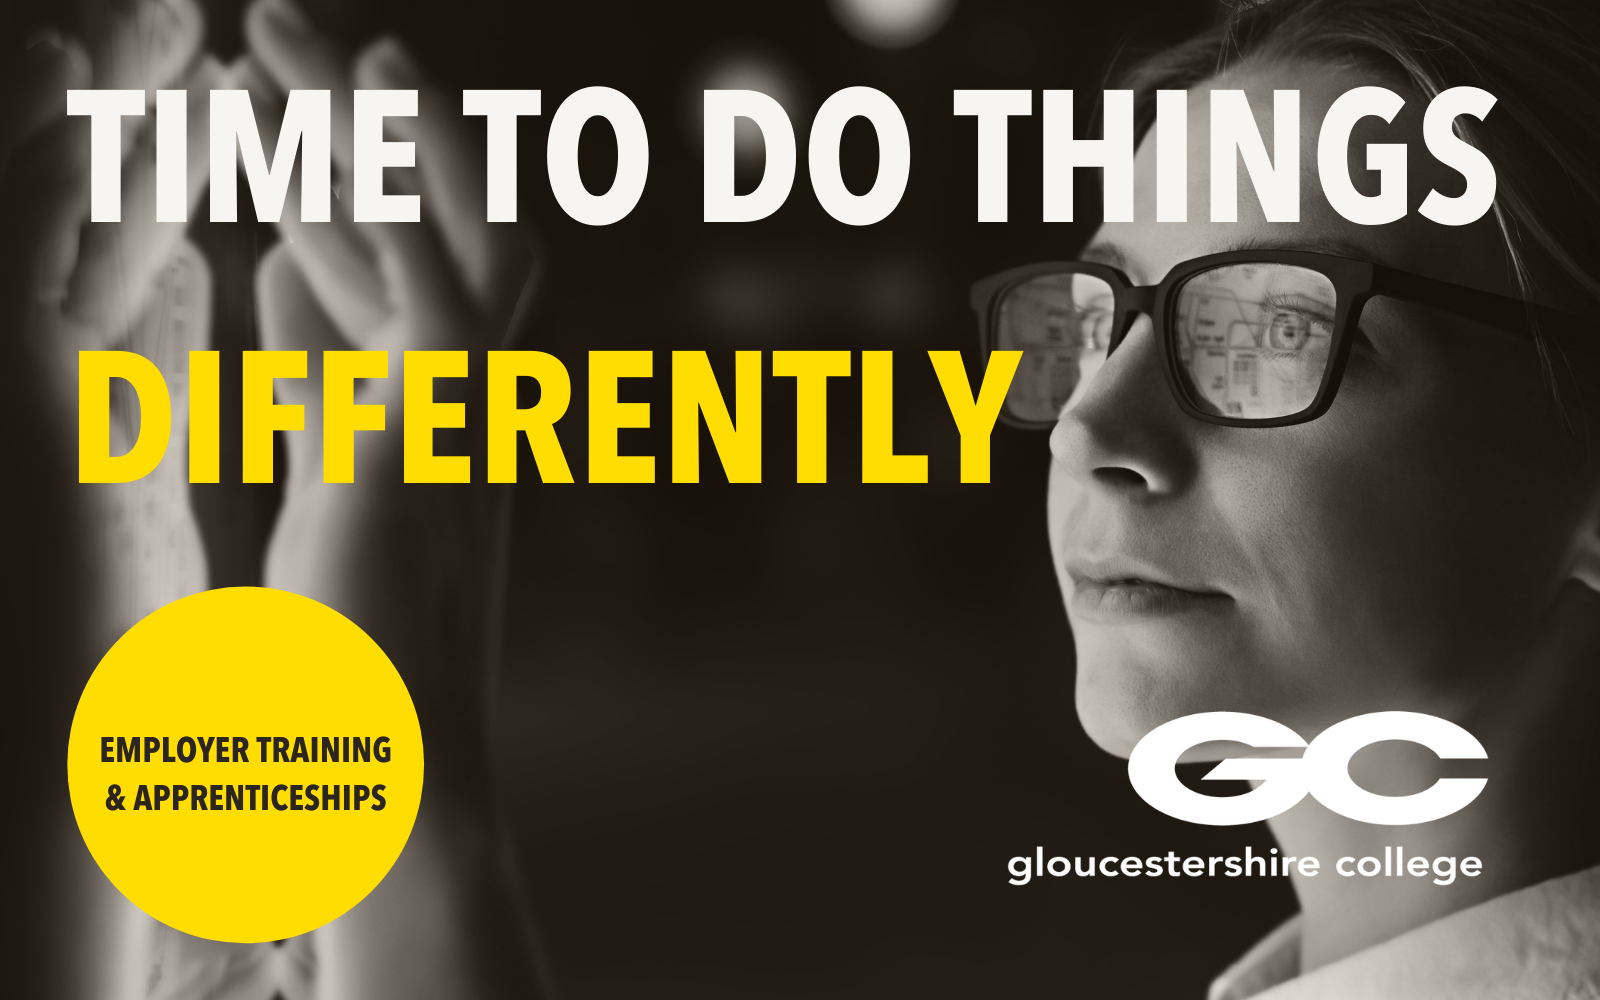 A brand new look for Employer Training & Apprenticeships at Gloucestershire College